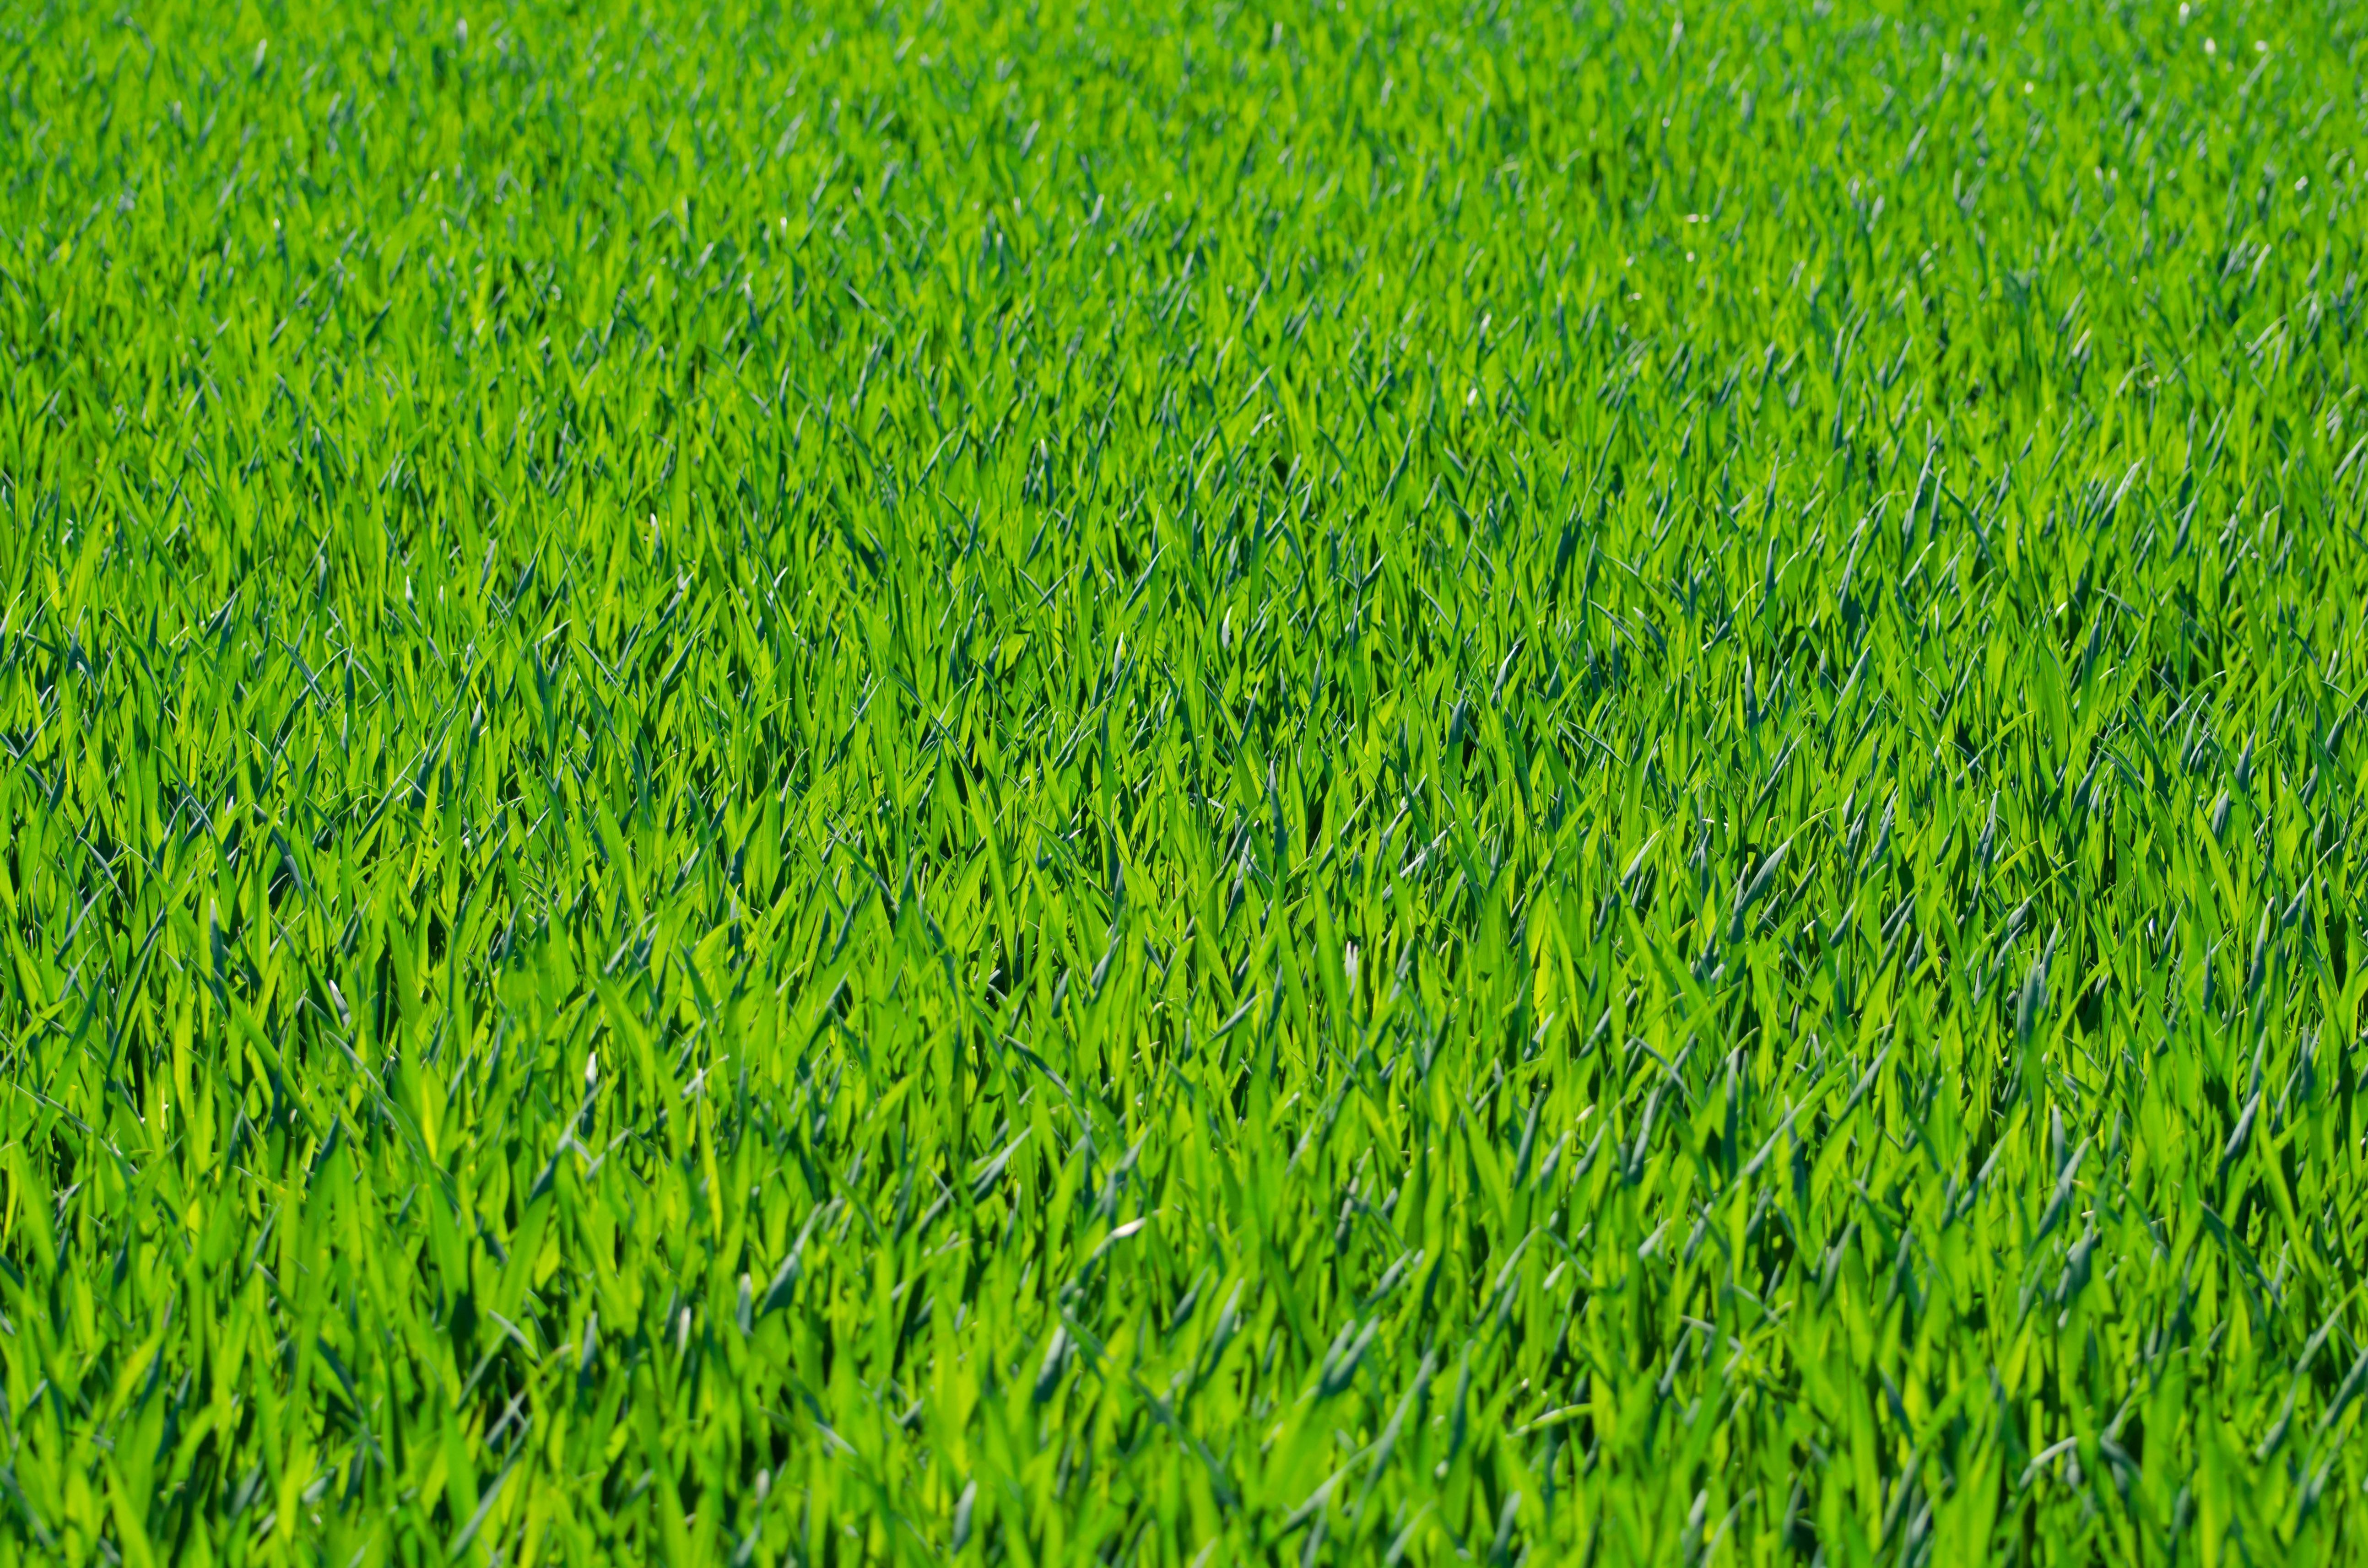 Seven Free Grass Textures or Lawn Background Images www